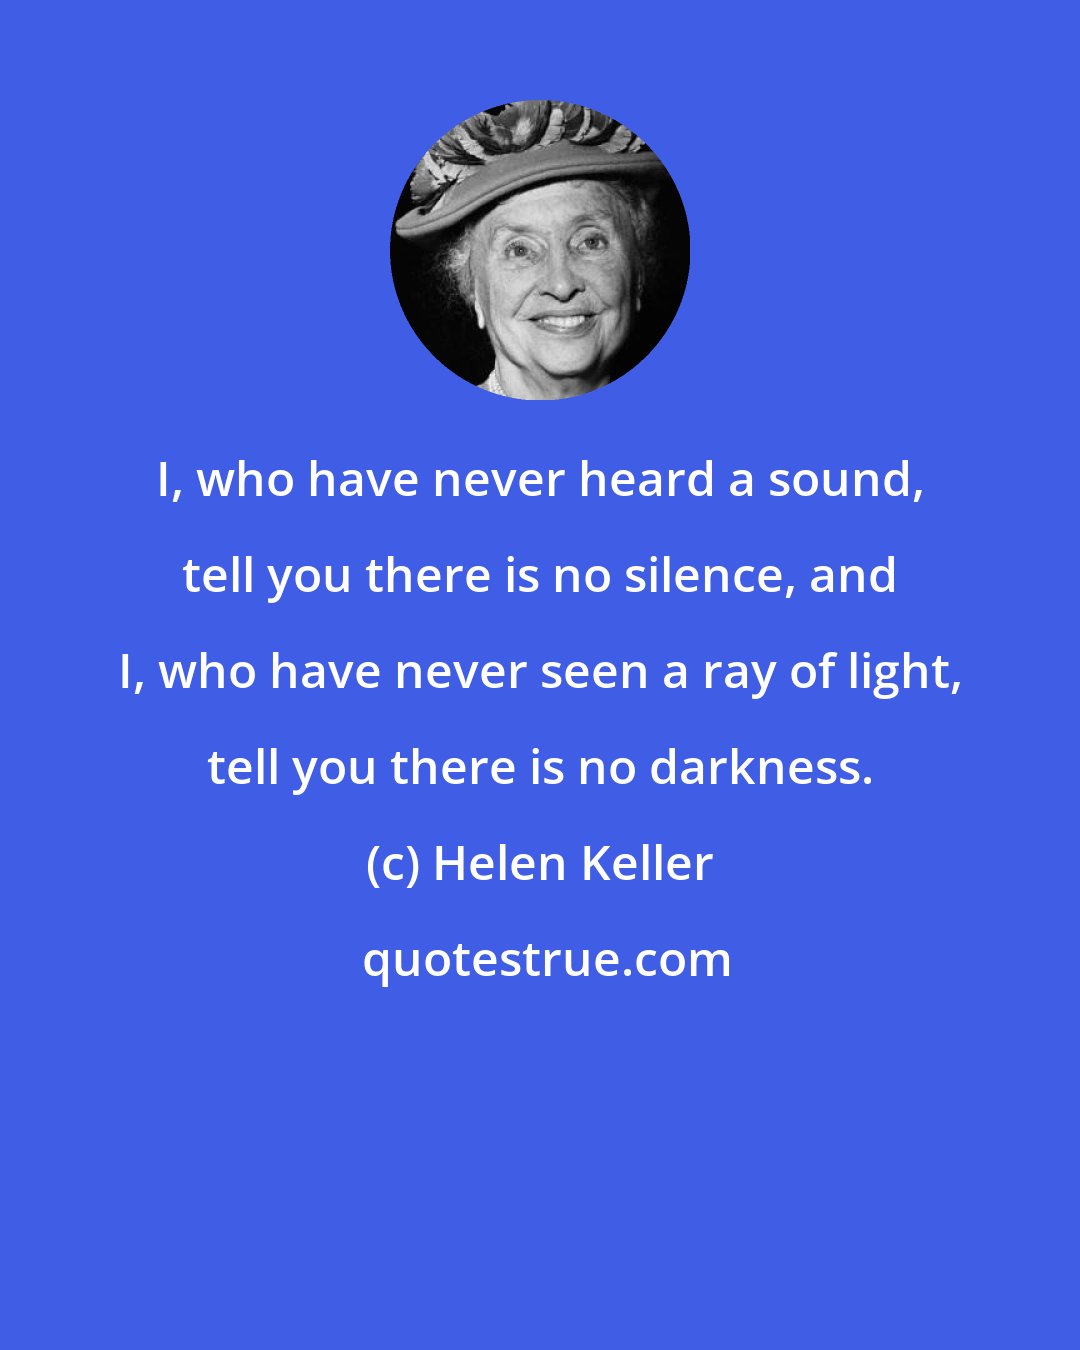 Helen Keller: I, who have never heard a sound, tell you there is no silence, and I, who have never seen a ray of light, tell you there is no darkness.